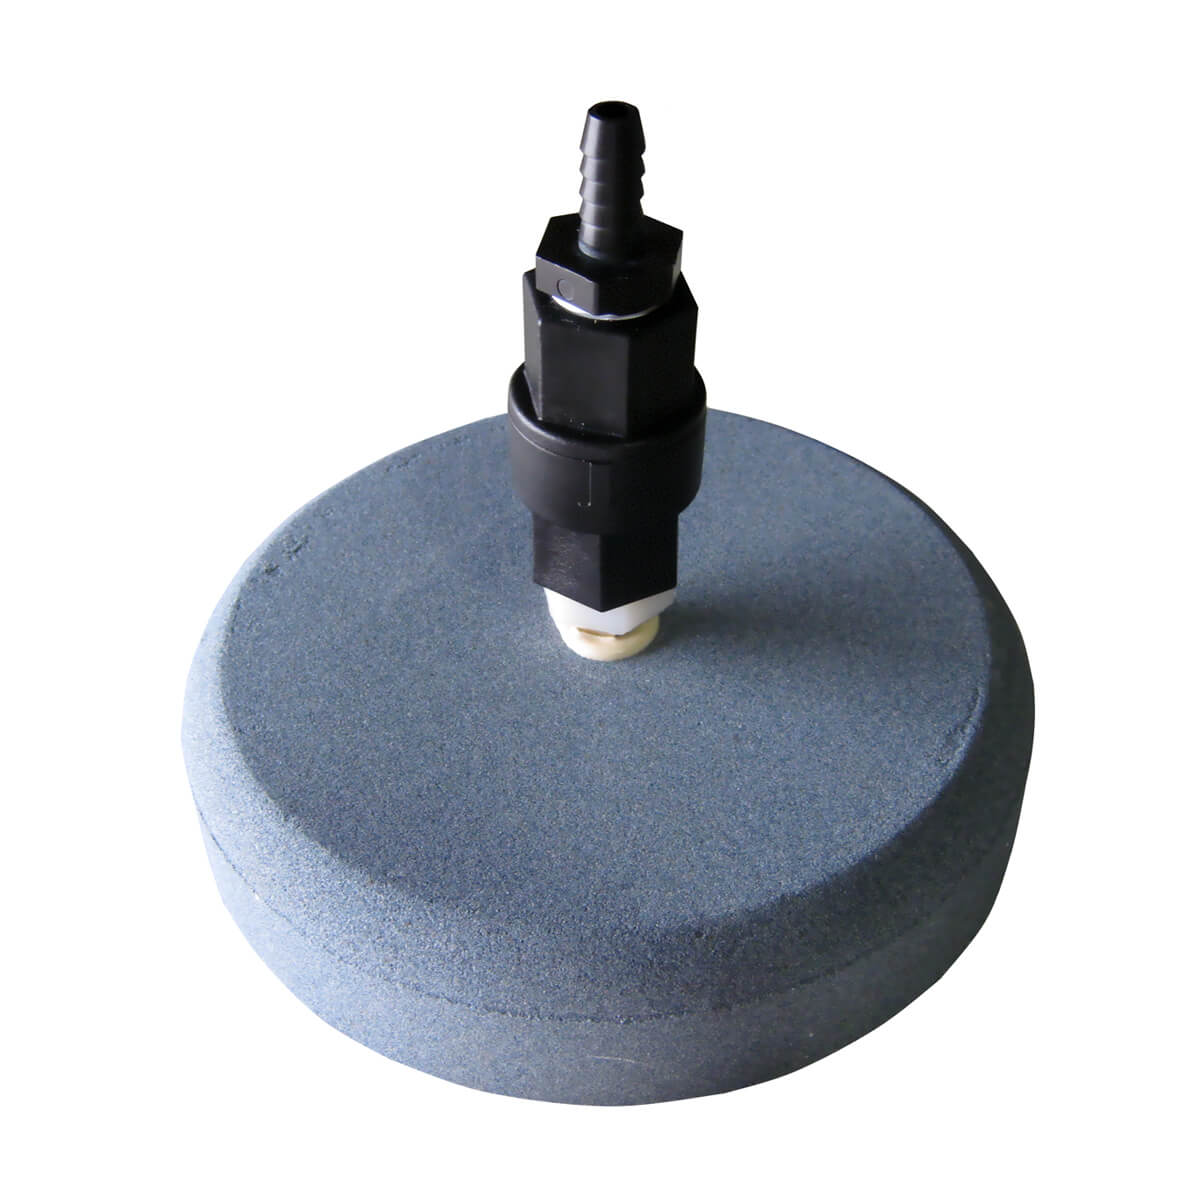 Airstone Diffuser and Foot Valve Kit